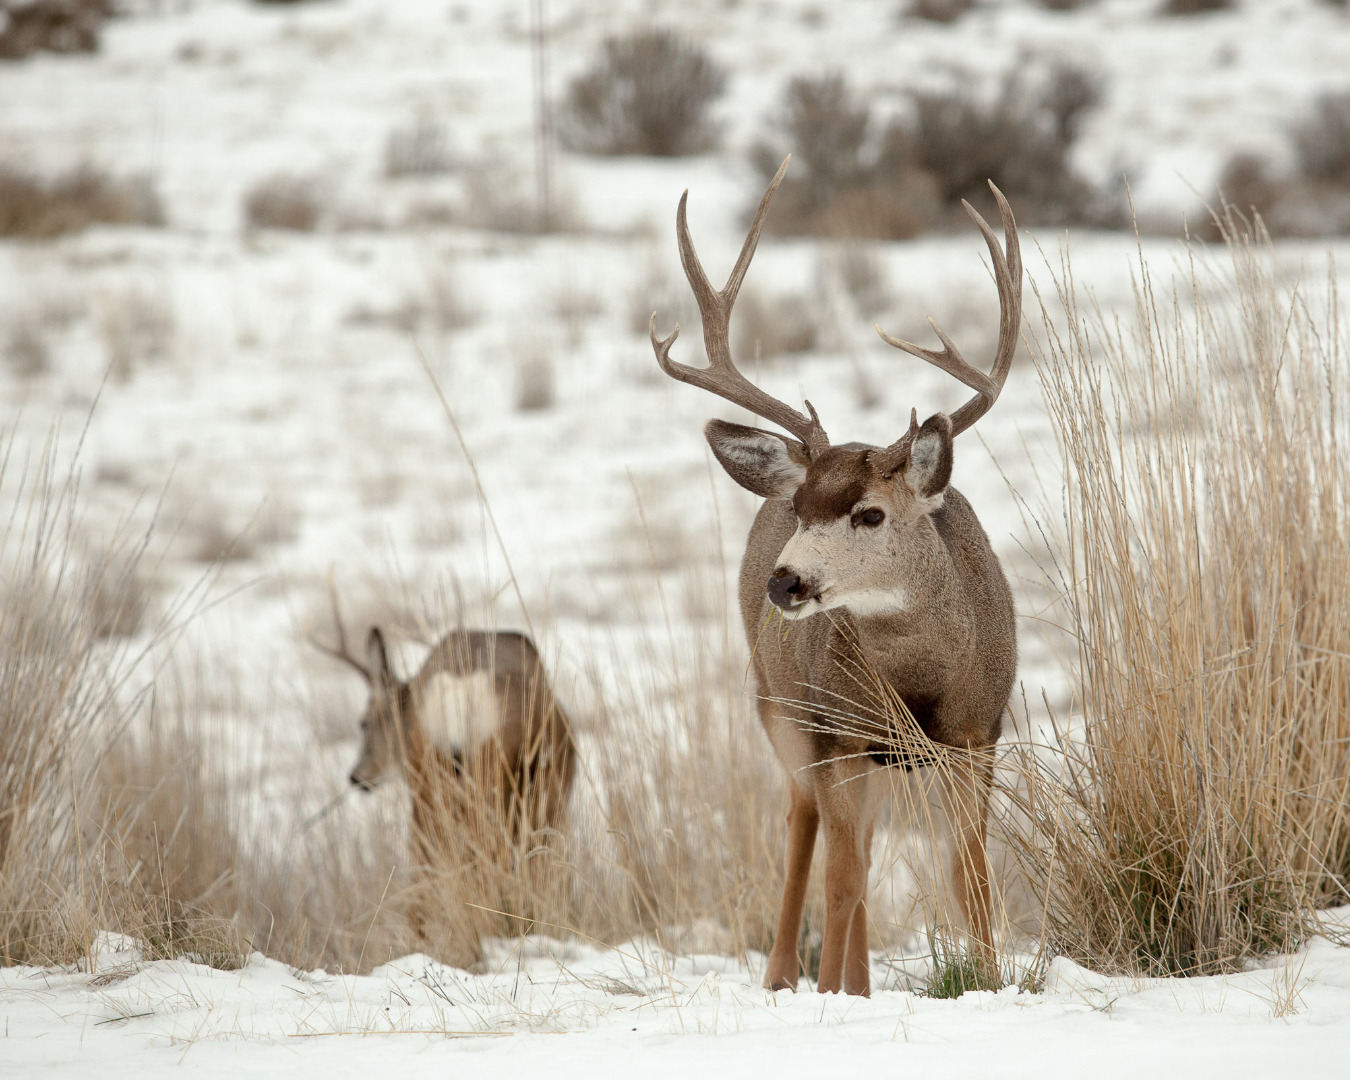 WDFW to use helicopters to capture mule deer in two Central Washington counties